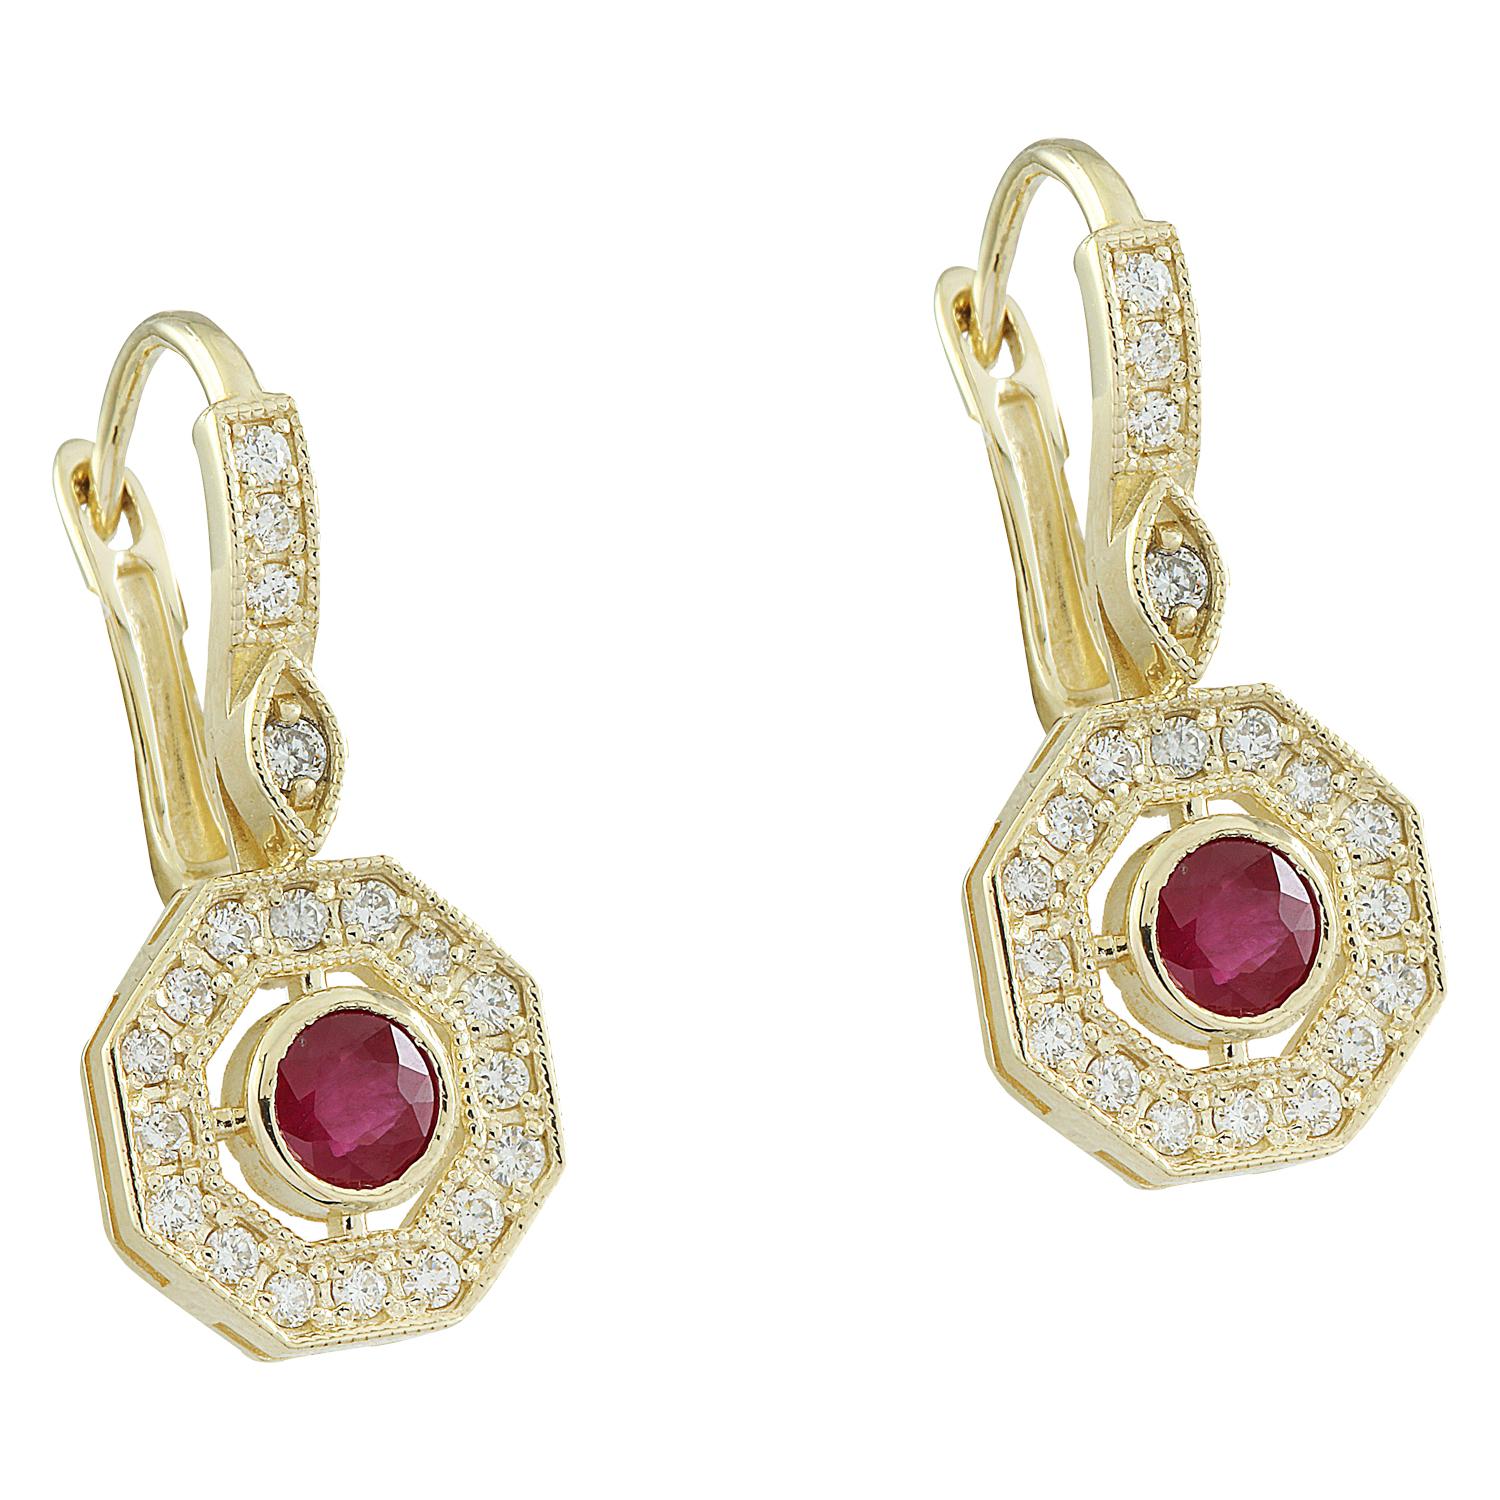 1.60 Carat Natural Ruby 14 Karat Solid Yellow Gold Diamond Earrings
Stamped: 14K
Total Earrings Weight: 4.5 Grams 
Ruby Weight: 1.00 Carat (4.00x4.00 Millimeters) 
Diamond Weight: 0.60 Carat (F-G Color, VS2-SI1 Clarity )
Length: 0.99 Inches
SKU: